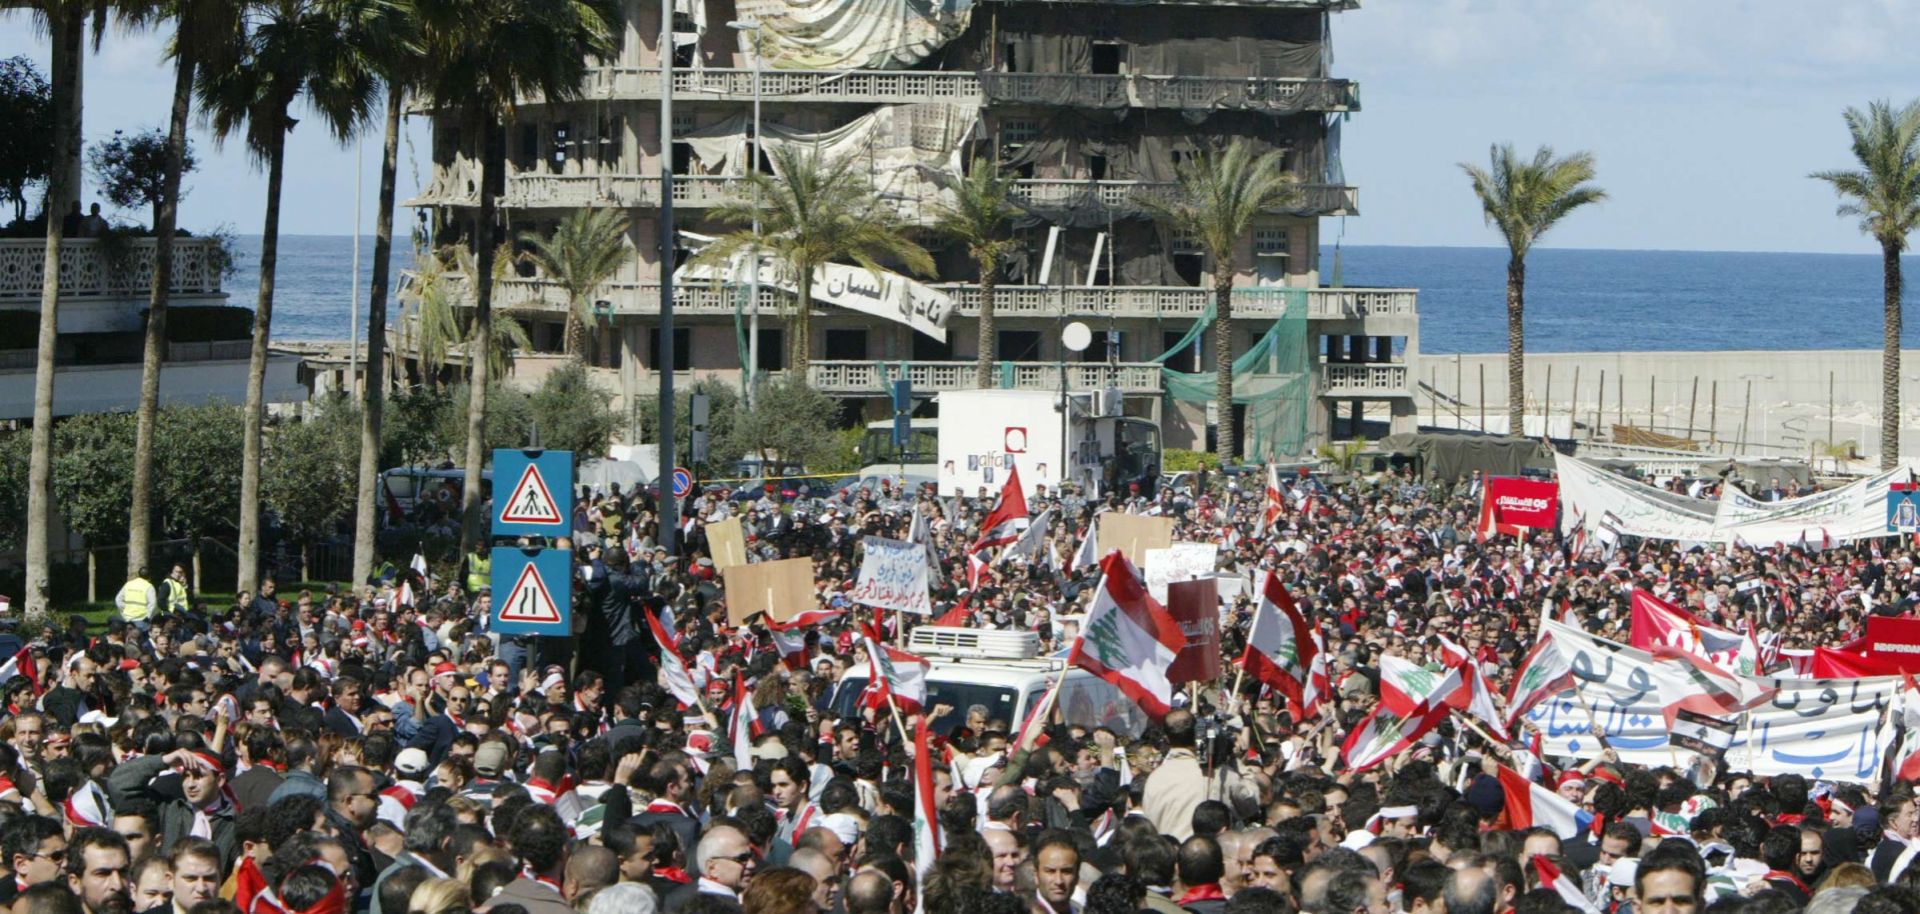 Since 1972, Lebanon has endured decades of Israeli invasion, Syrian occupation, government collapse and civil war.